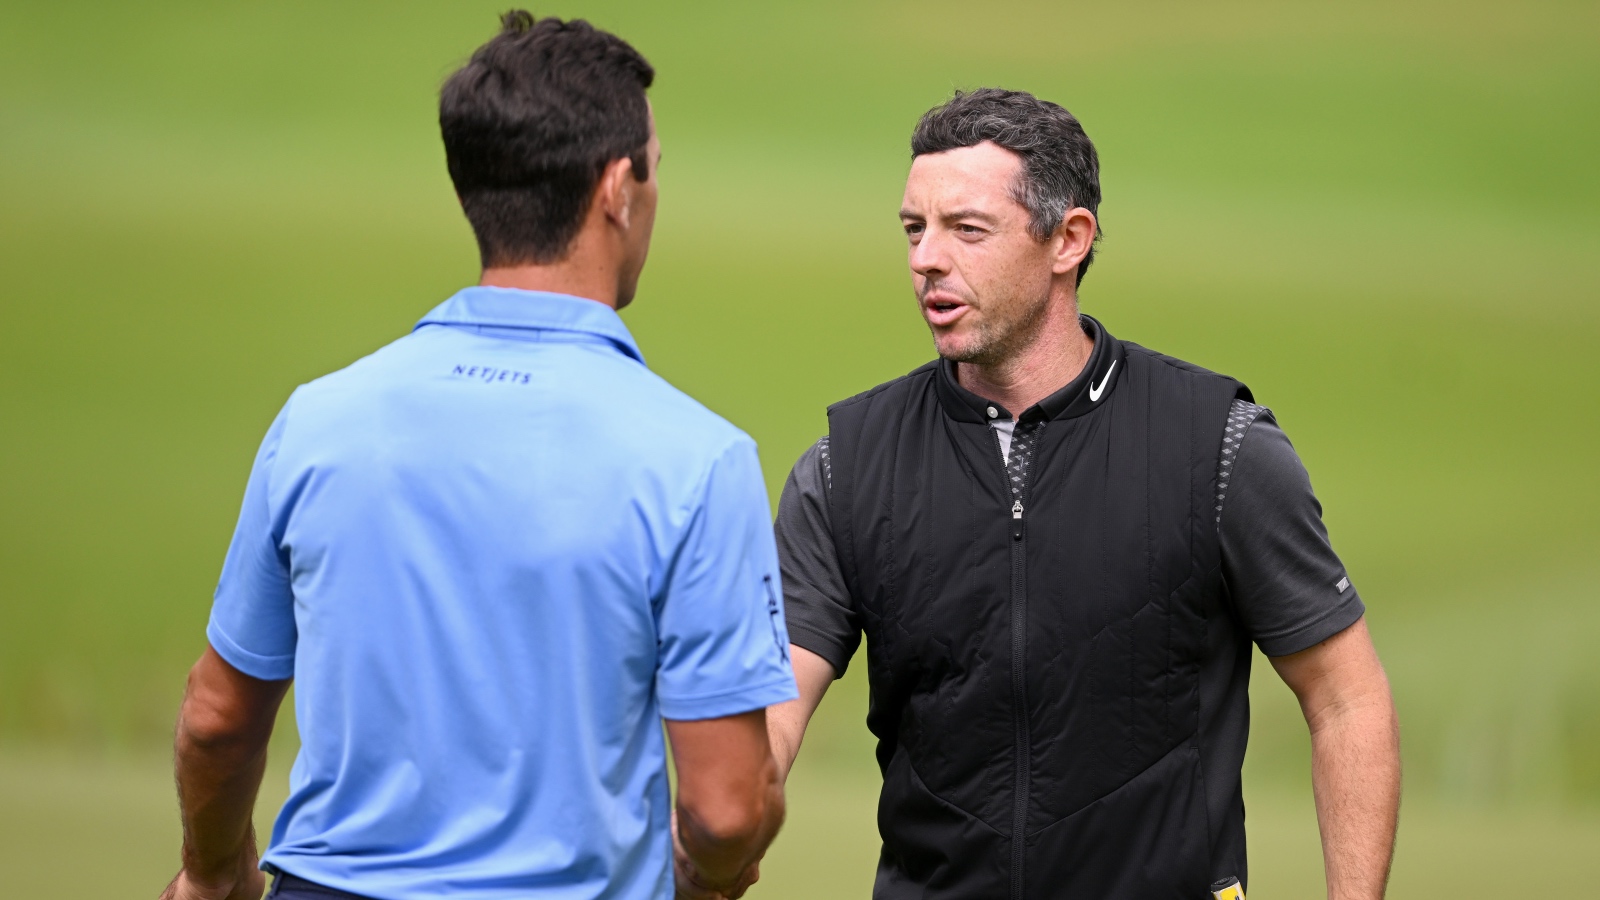 Billy Horschel shaking hands with Rory McIlroy